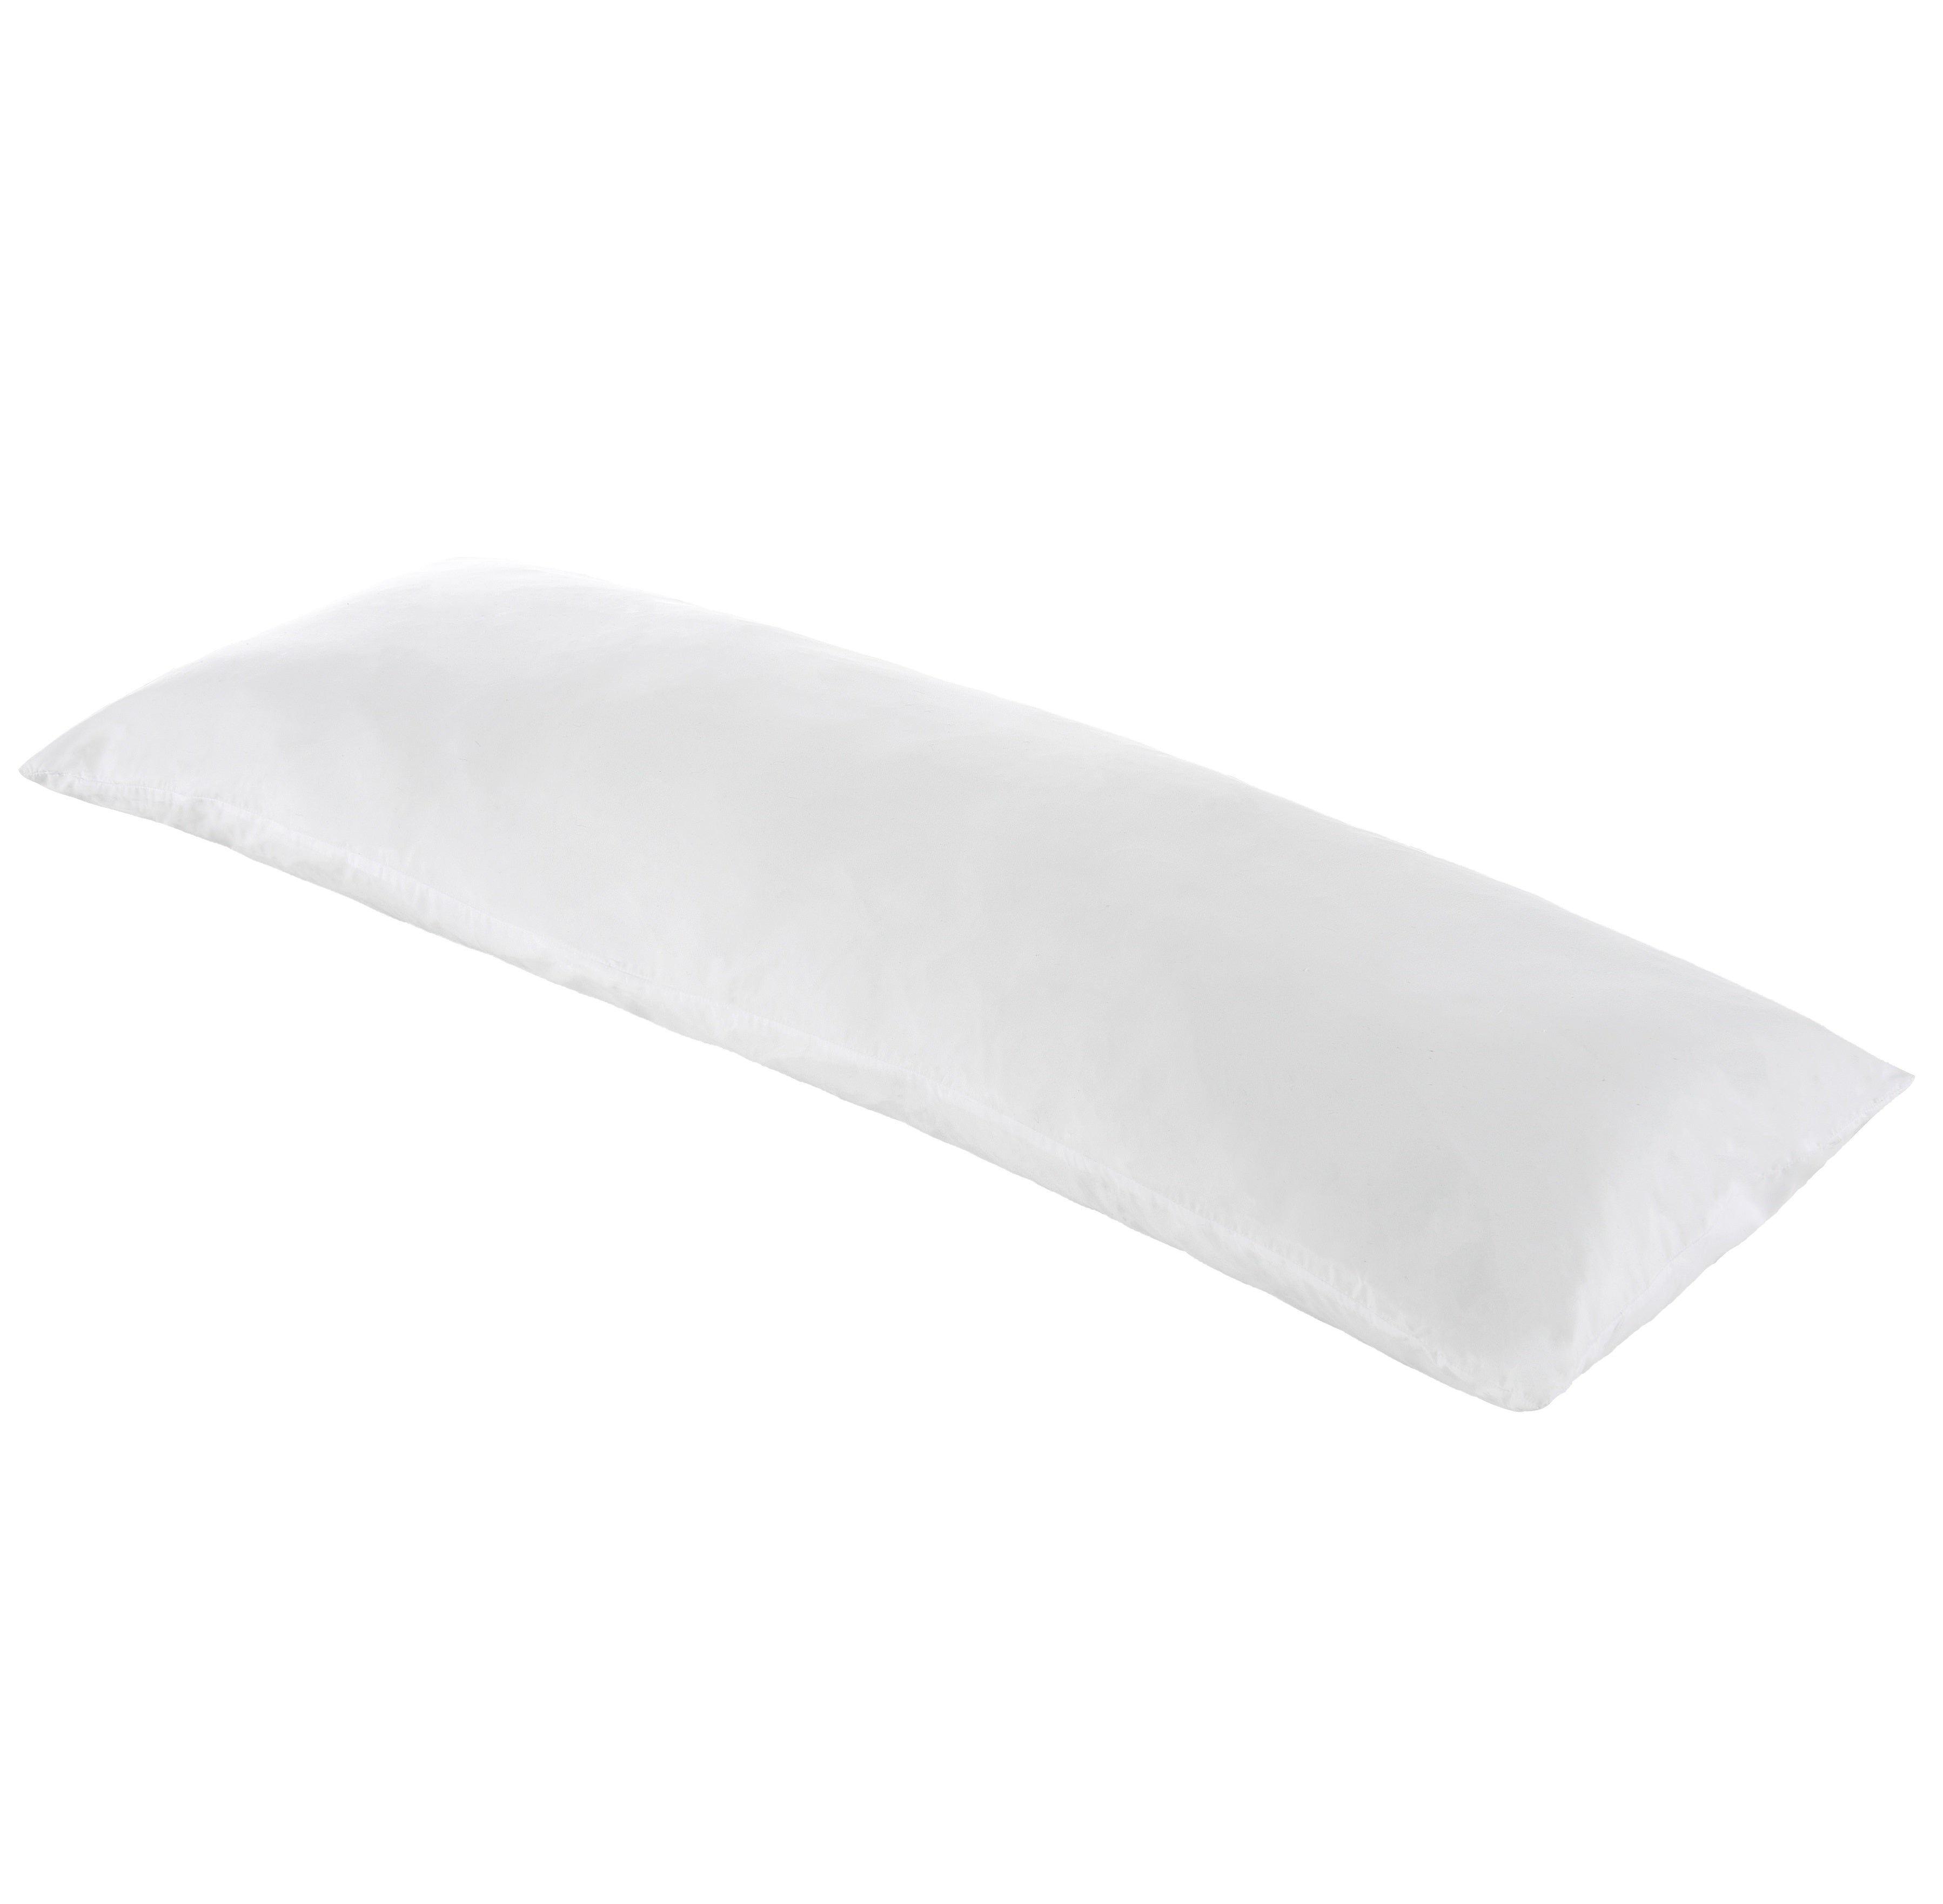 https://cdn.shopify.com/s/files/1/2091/6511/products/cheer-collection-hypoallergenic-down-alternative-premium-20-x-54-side-body-pillow-washable-cover-962289.jpg?v=1671780181